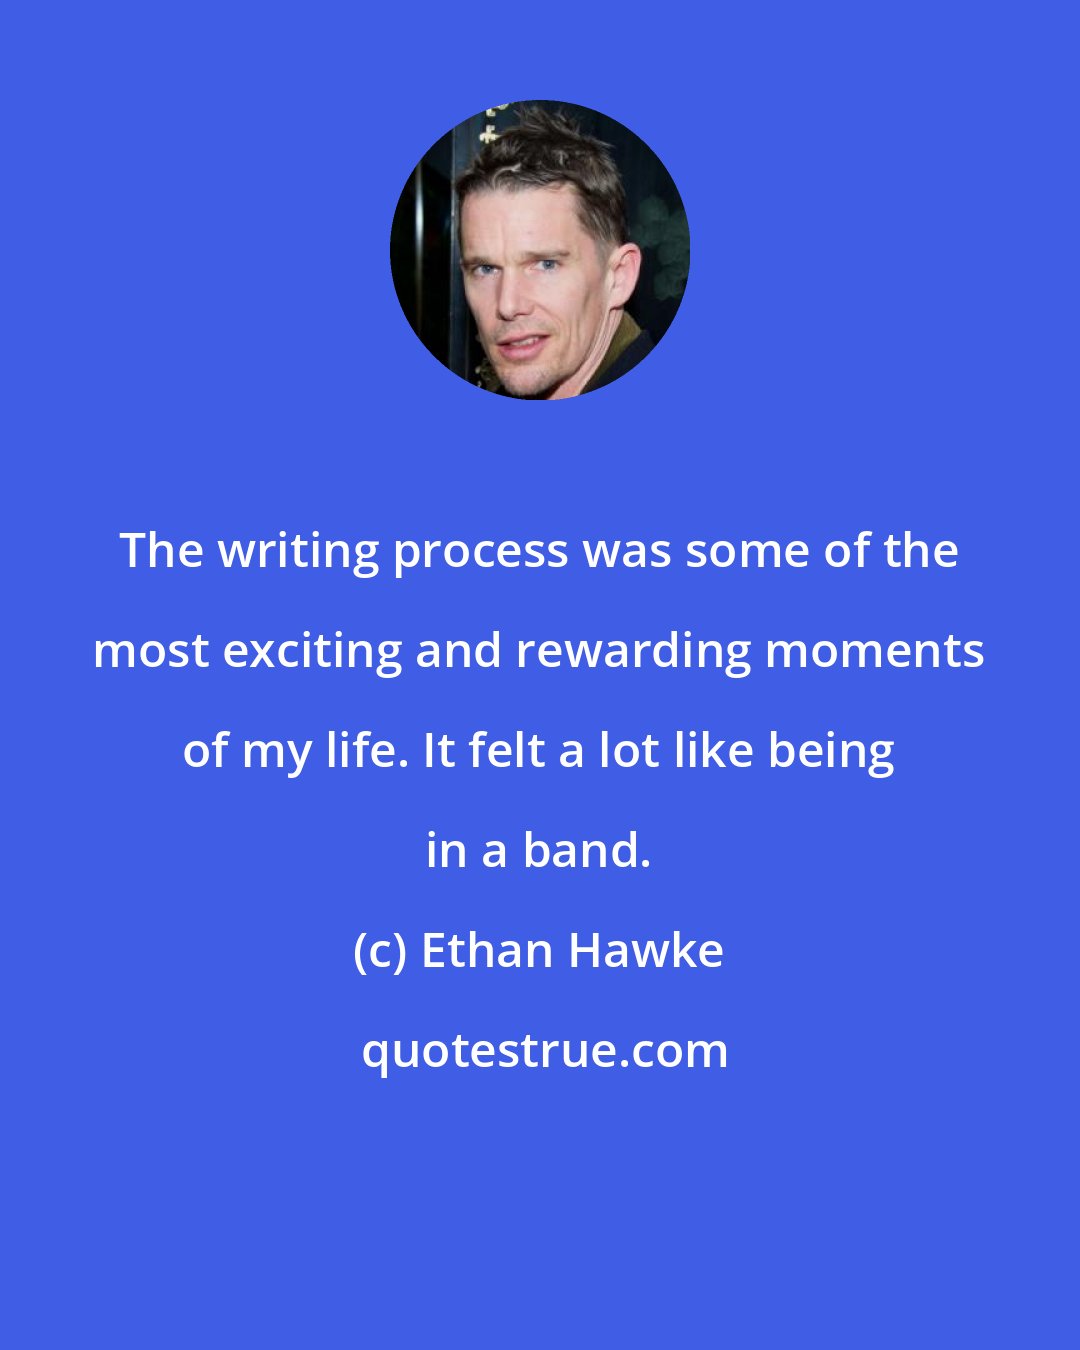 Ethan Hawke: The writing process was some of the most exciting and rewarding moments of my life. It felt a lot like being in a band.